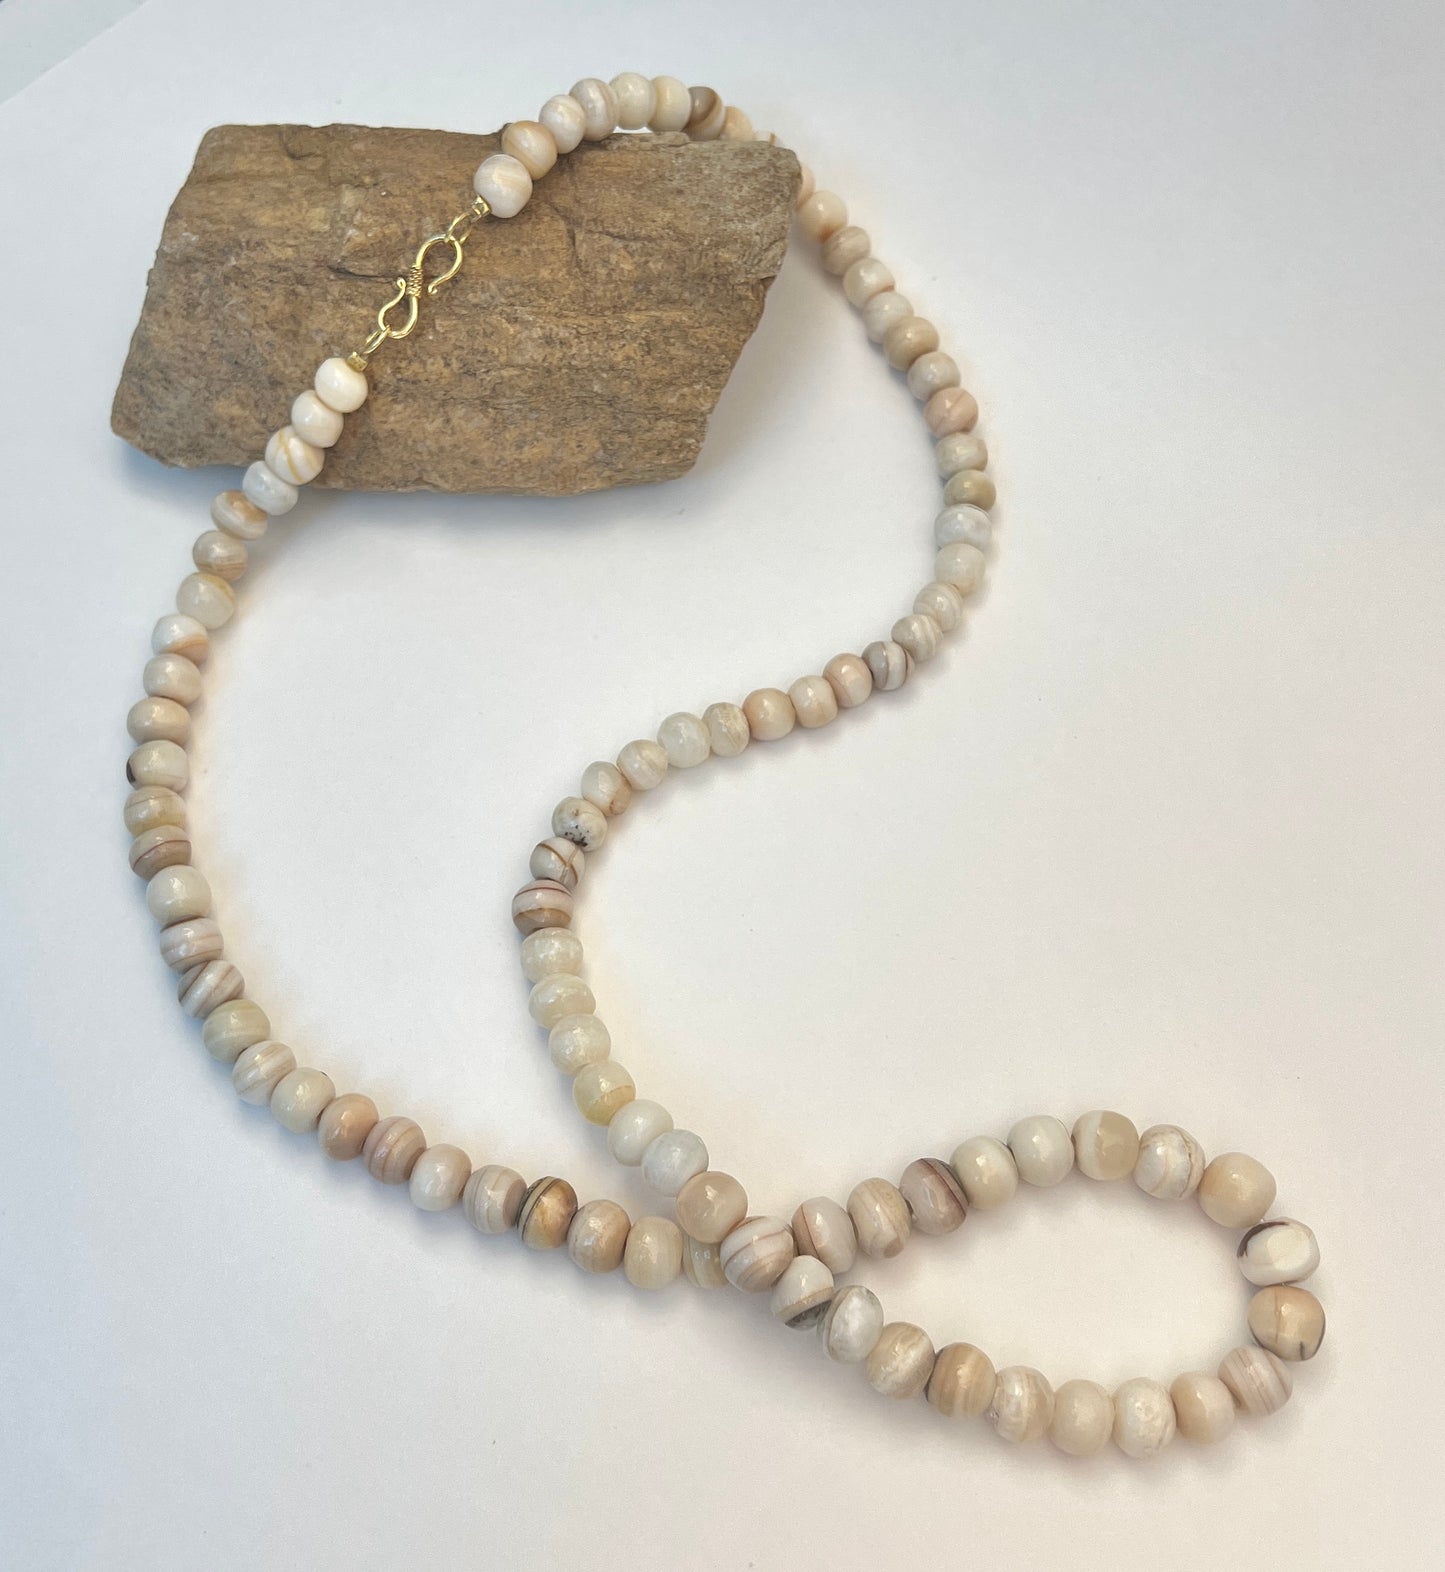 The Natural Stone Long Necklace